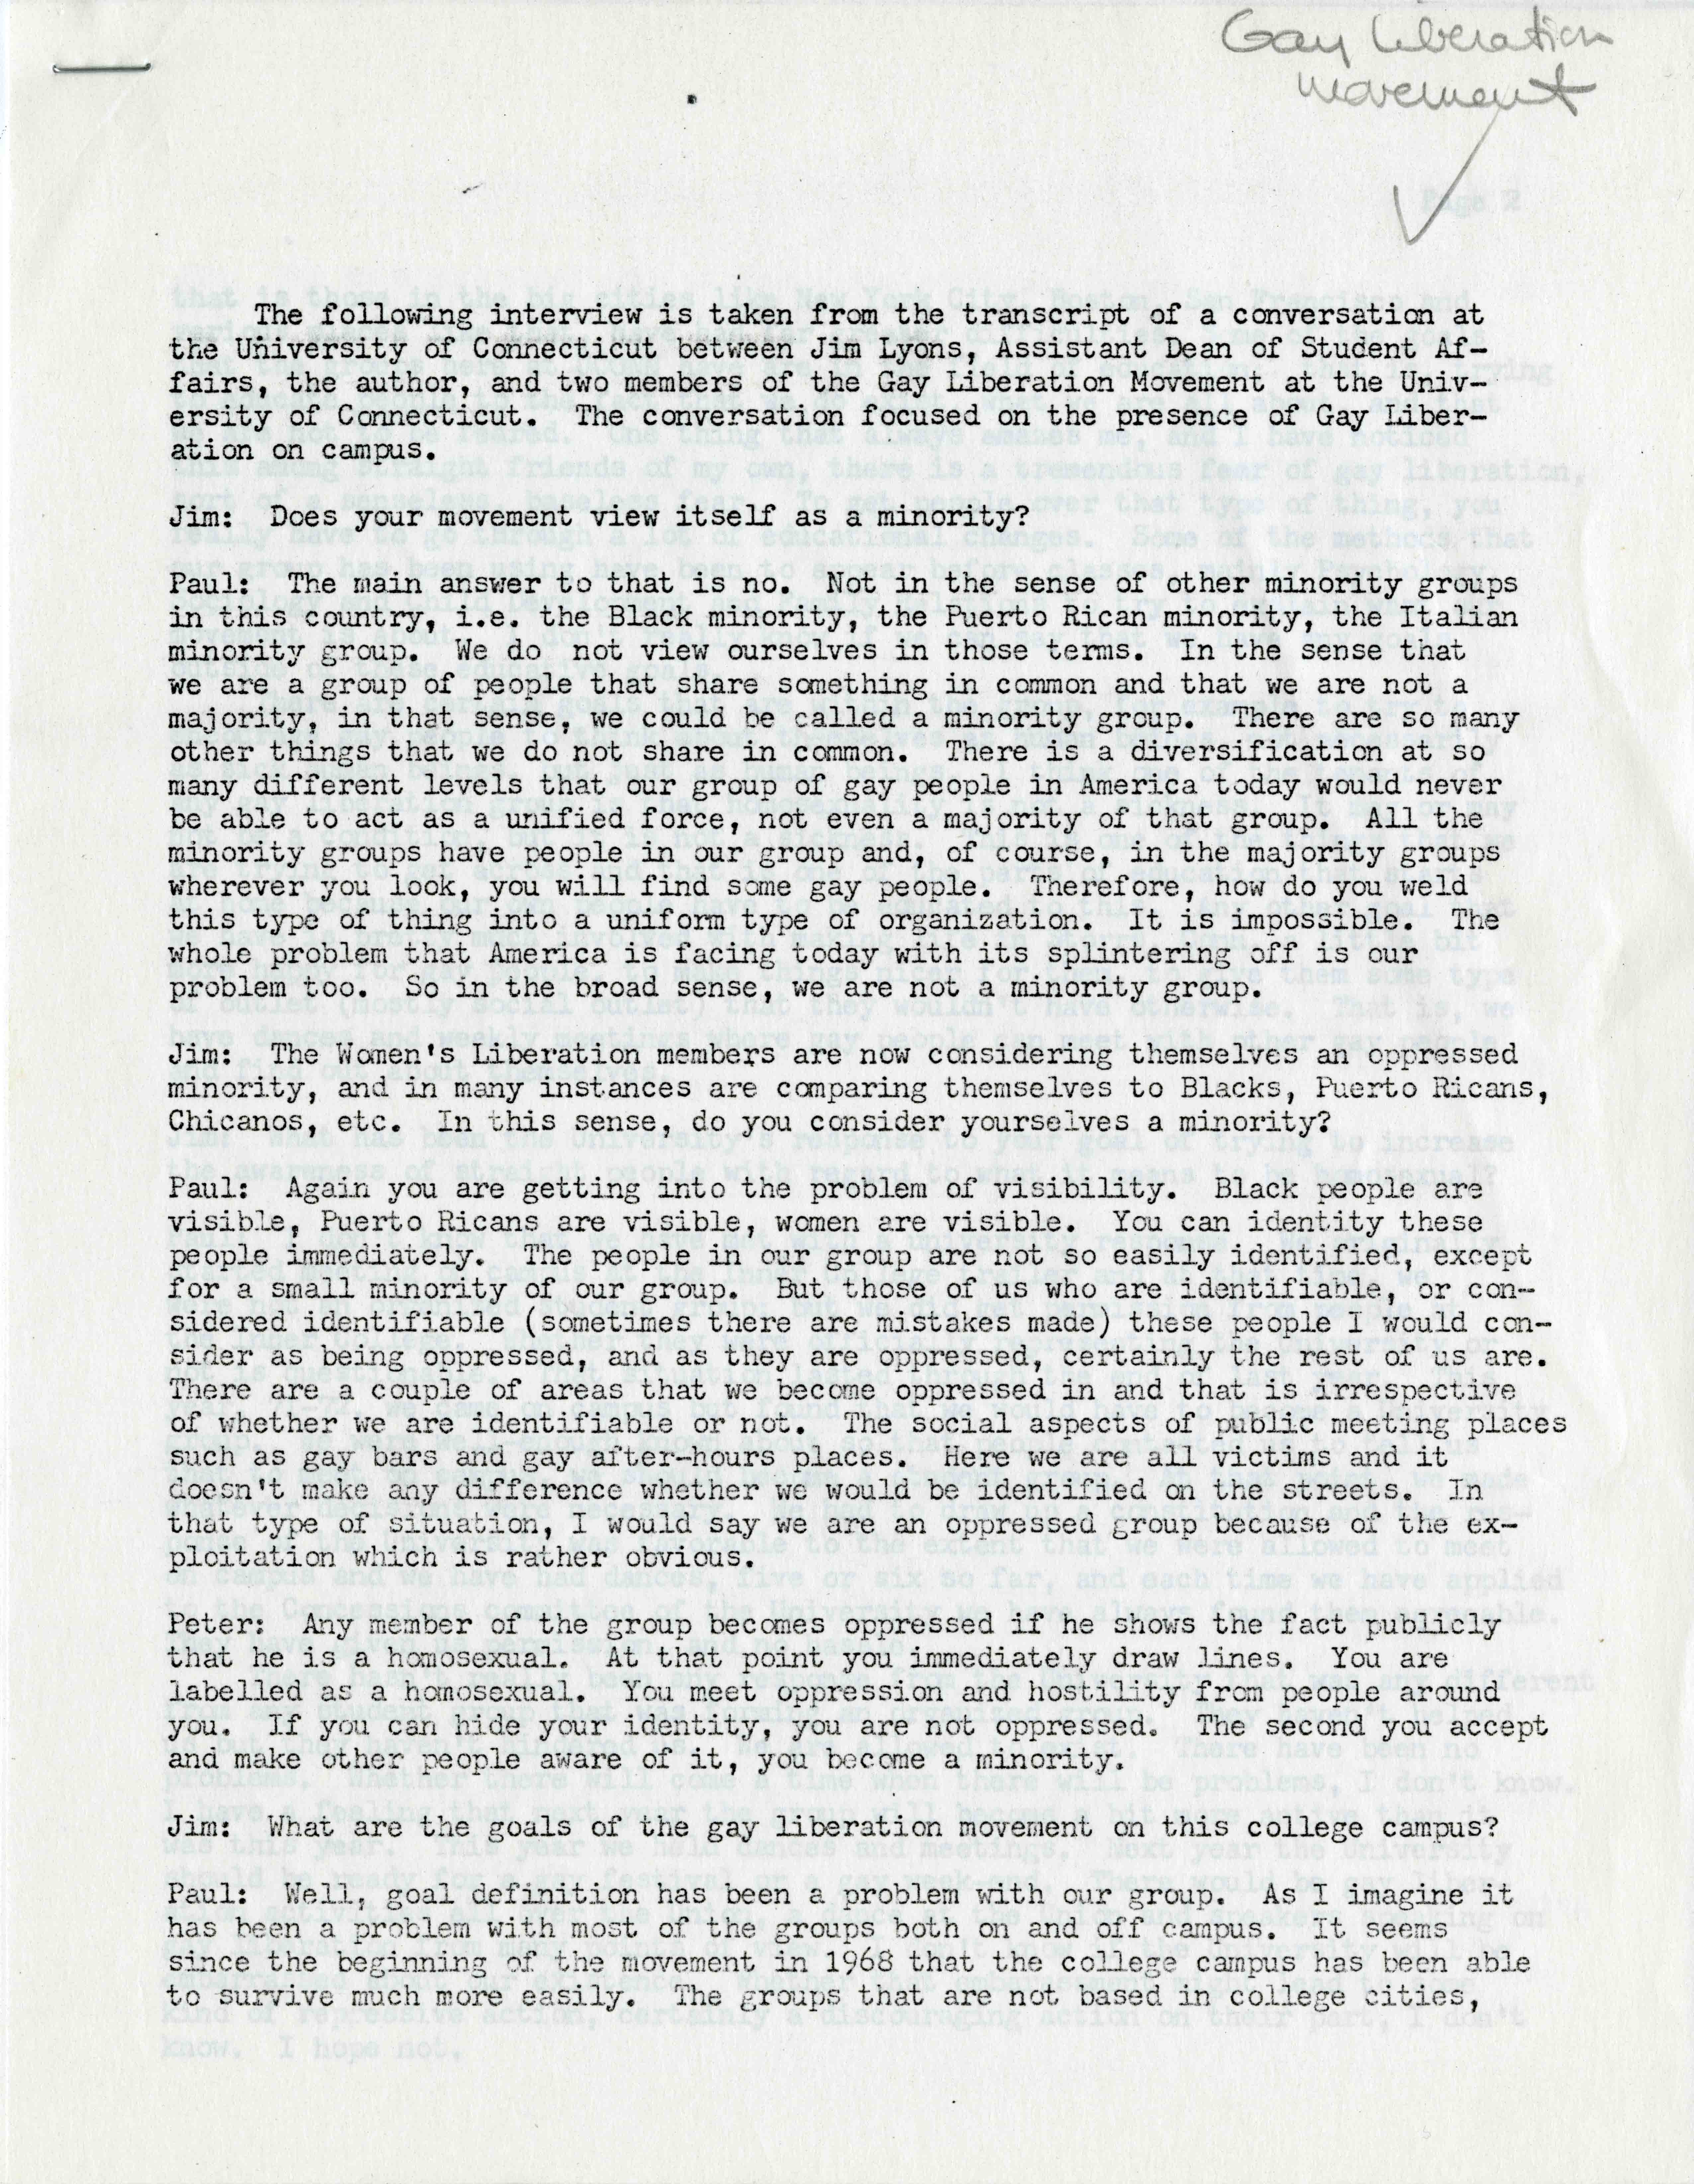 Page from the transcript of an interview with two members of the gay liberation movement at UConn (undated)